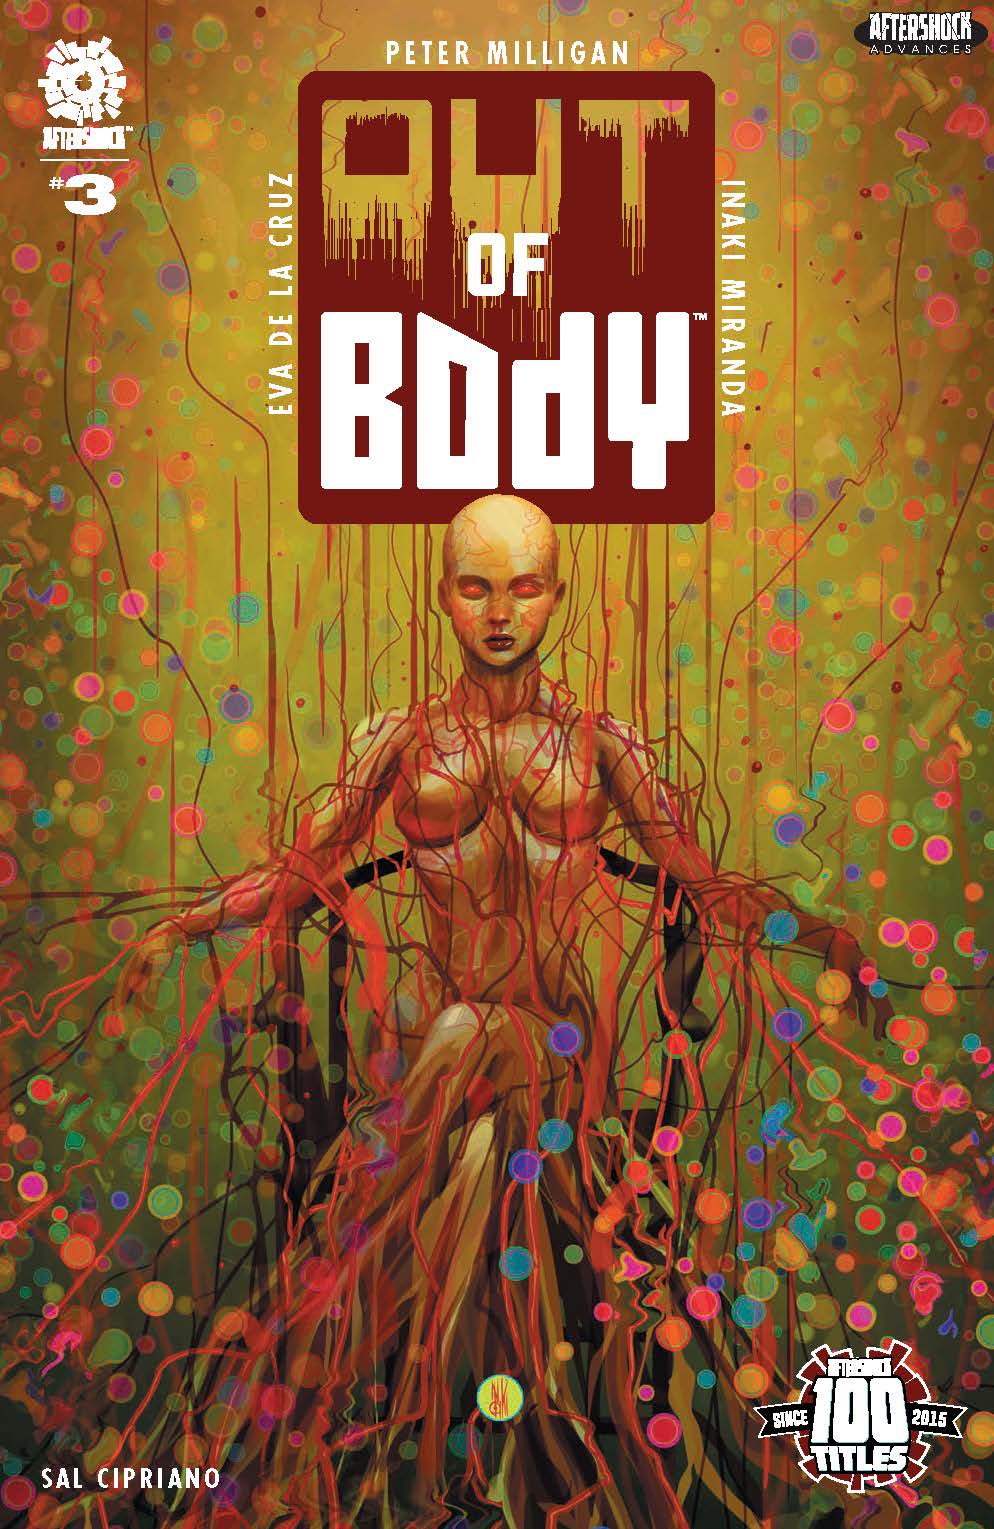 Out of Body #3